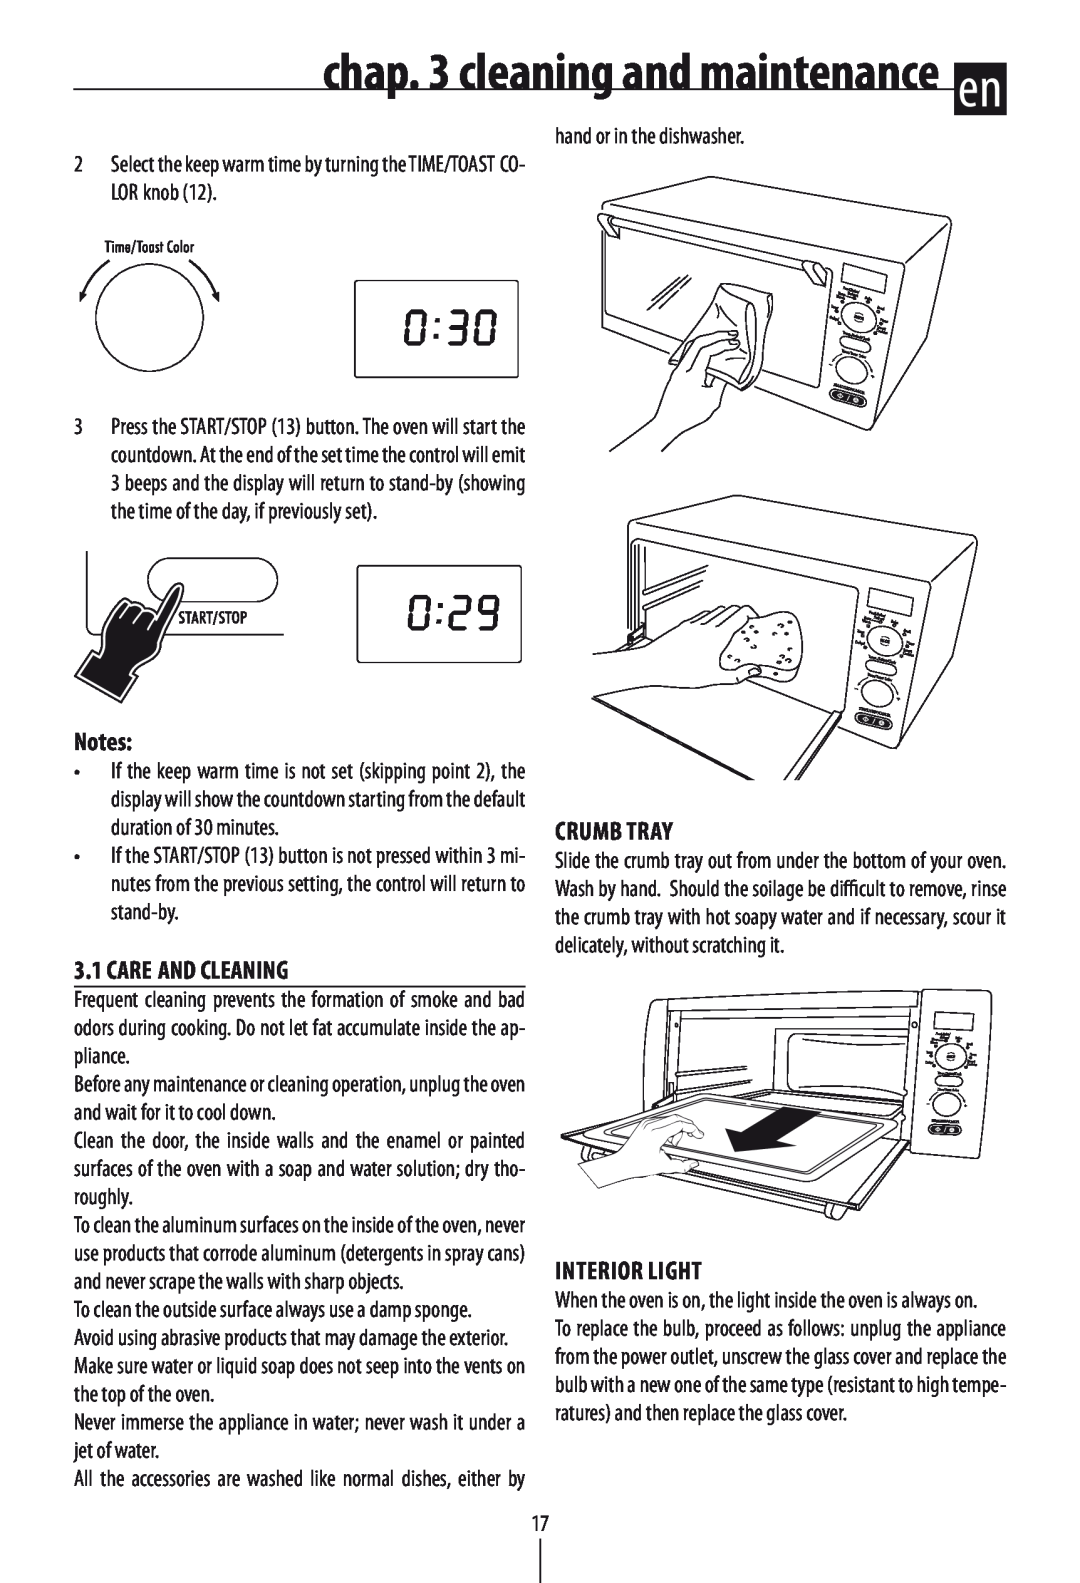 DeLonghi DO1289 manual Care And Cleaning, Crumb tray, Interior light, chap. 3 cleaning and maintenance en, Notes 